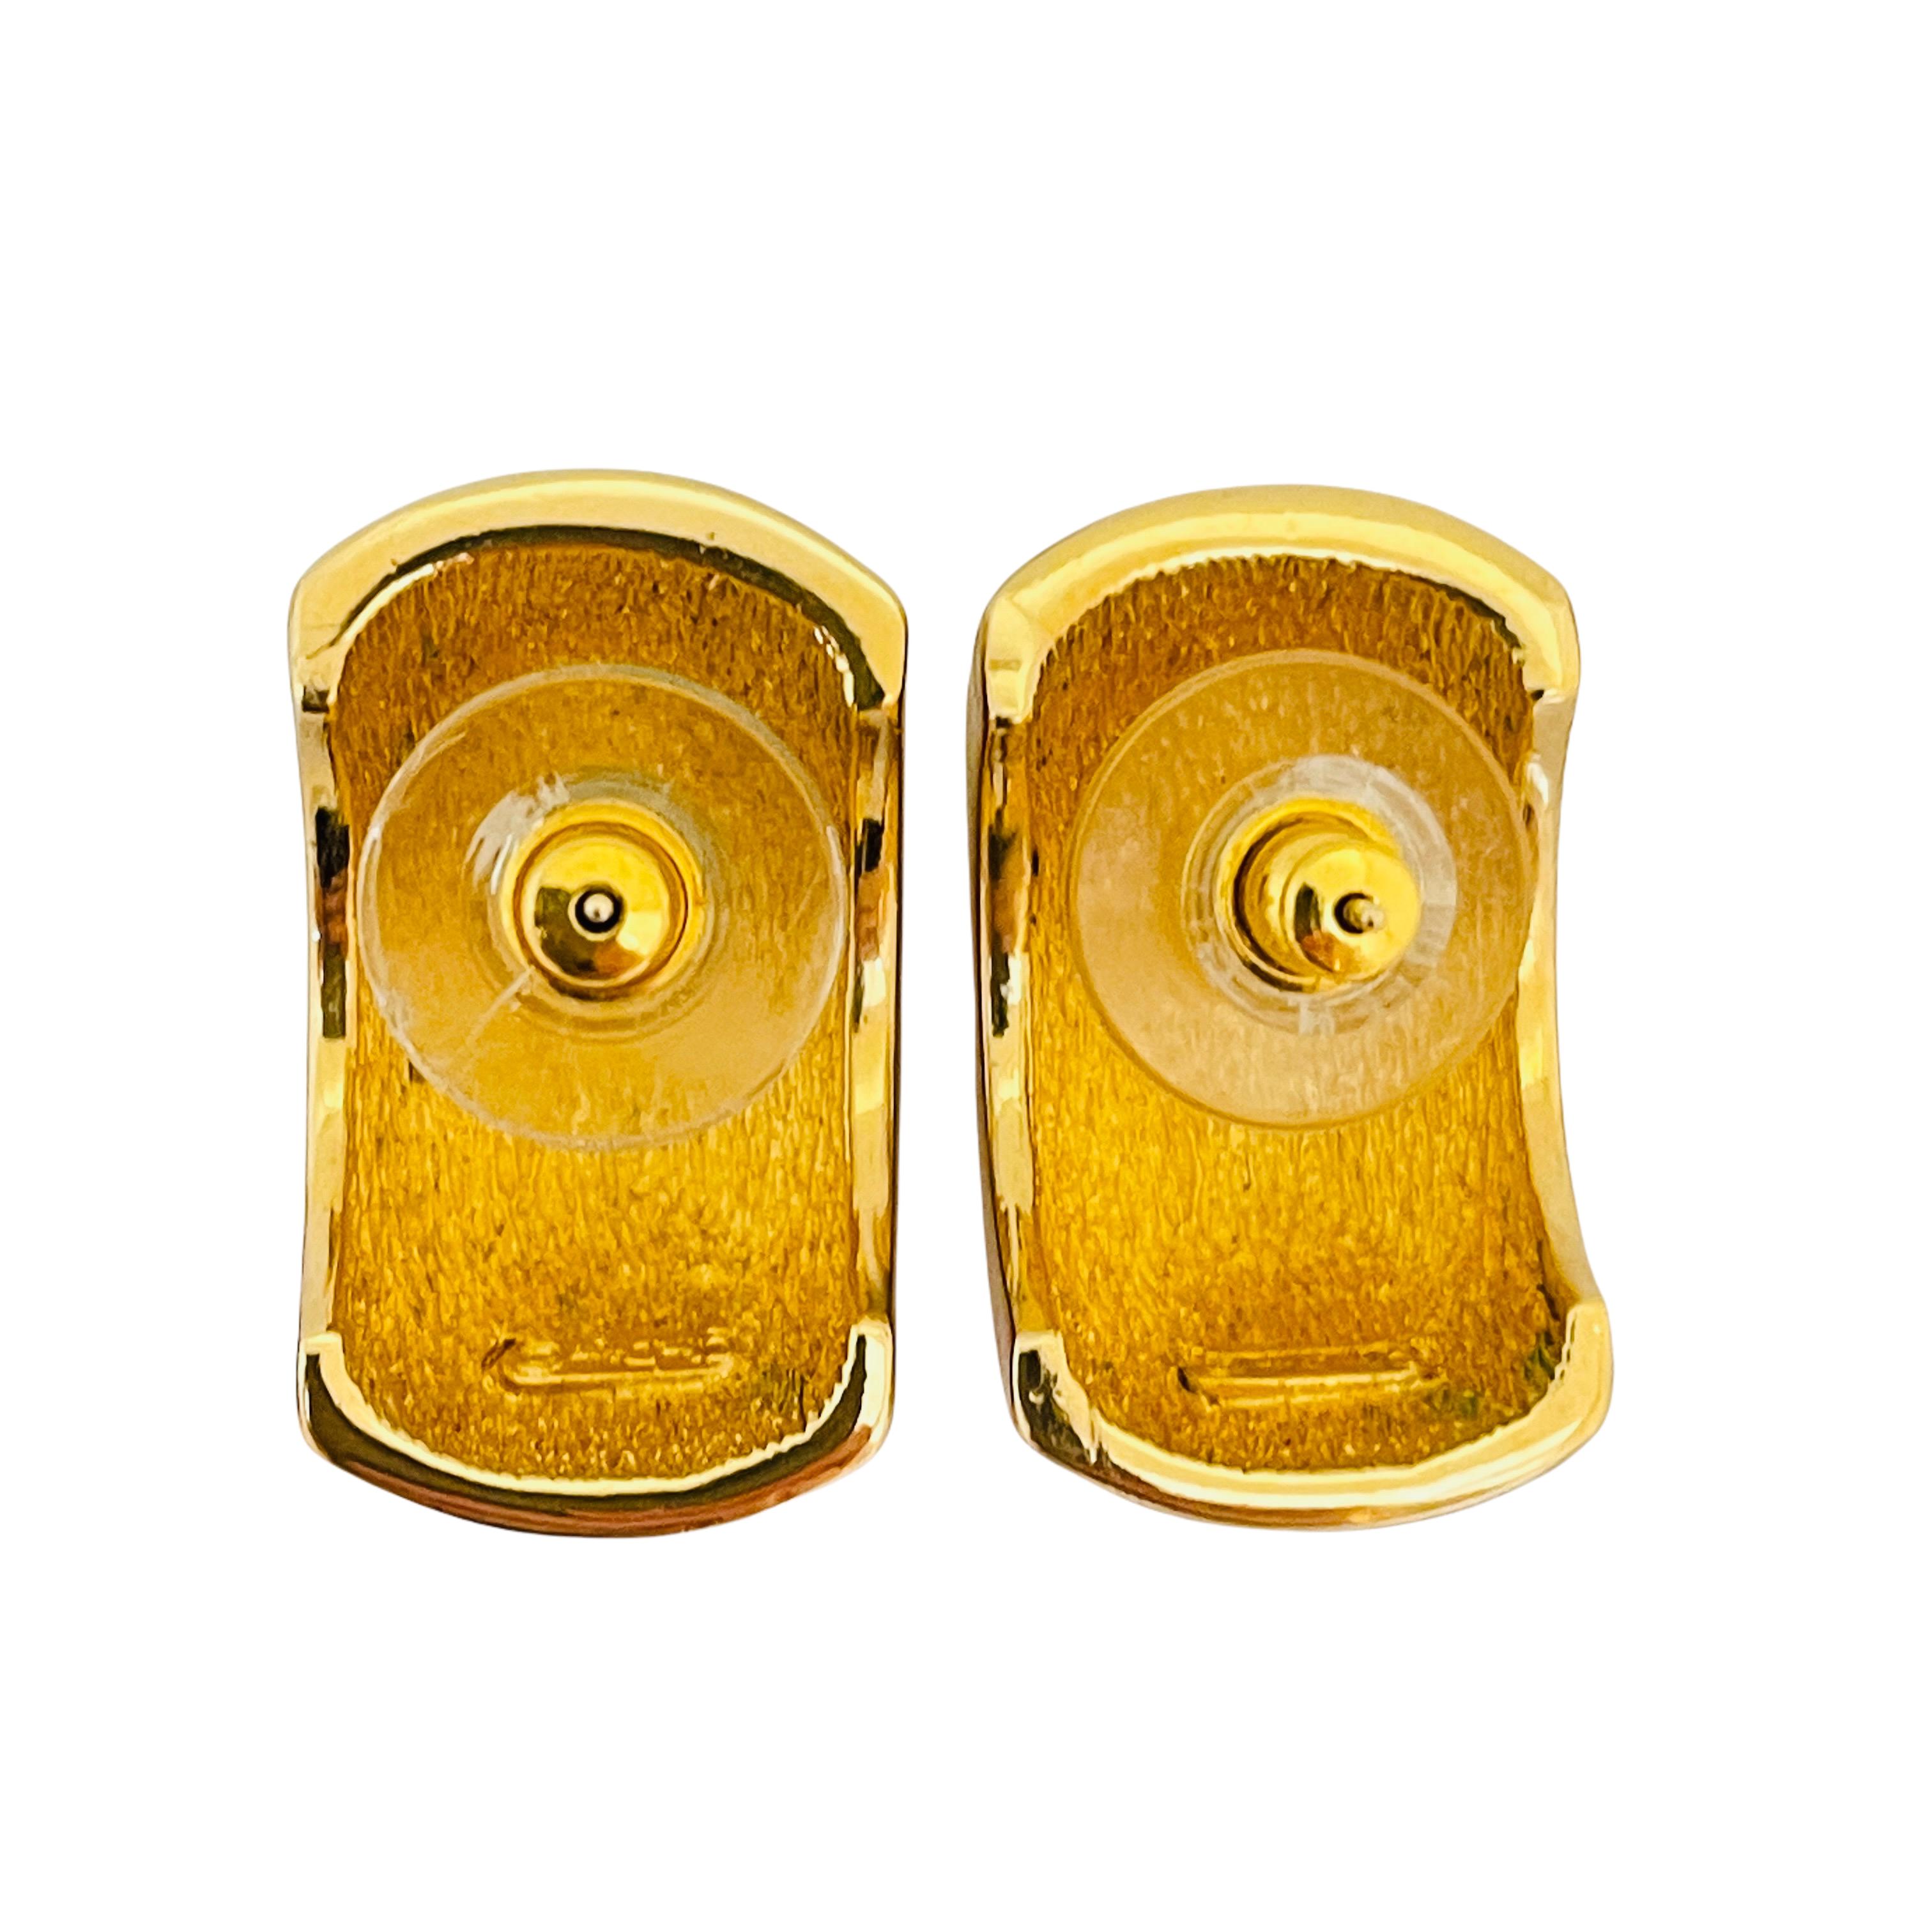 Vintage CHRISTIAN DIOR gold crystal designer runway earrings In Excellent Condition For Sale In Palos Hills, IL